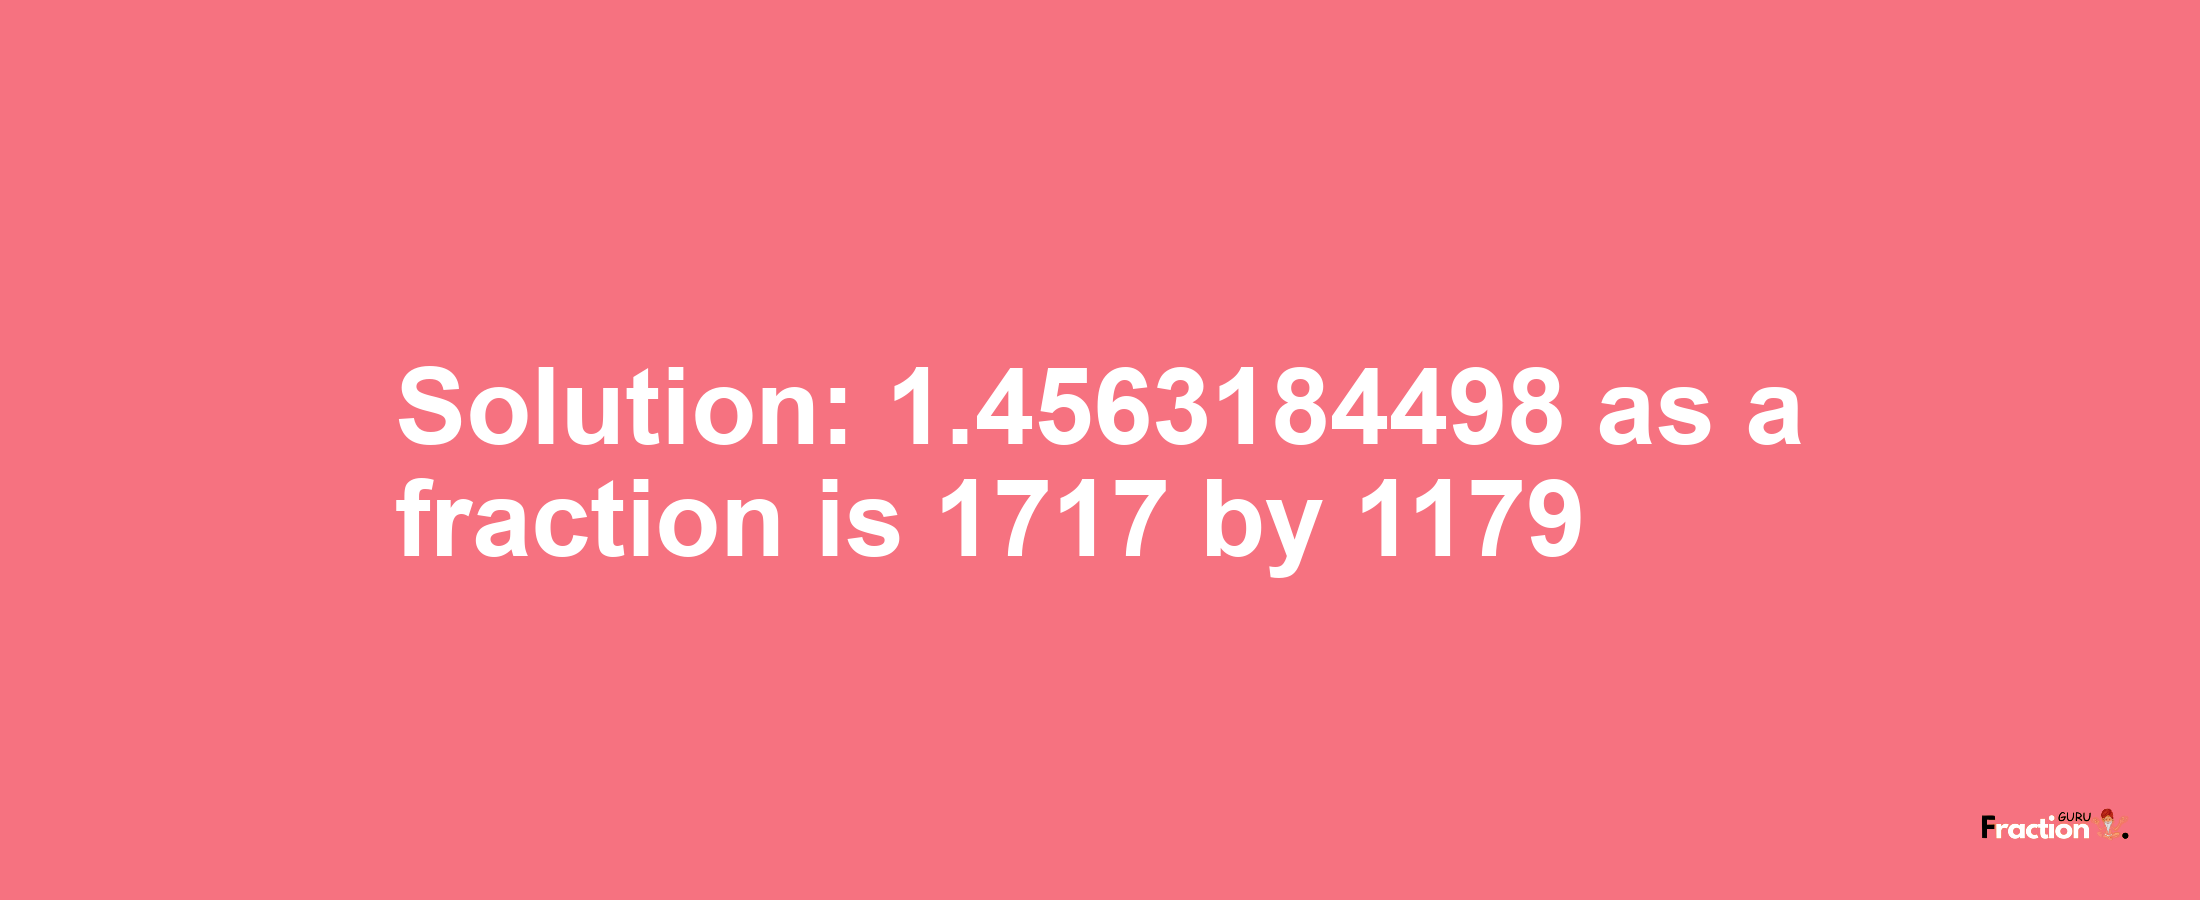 Solution:1.4563184498 as a fraction is 1717/1179